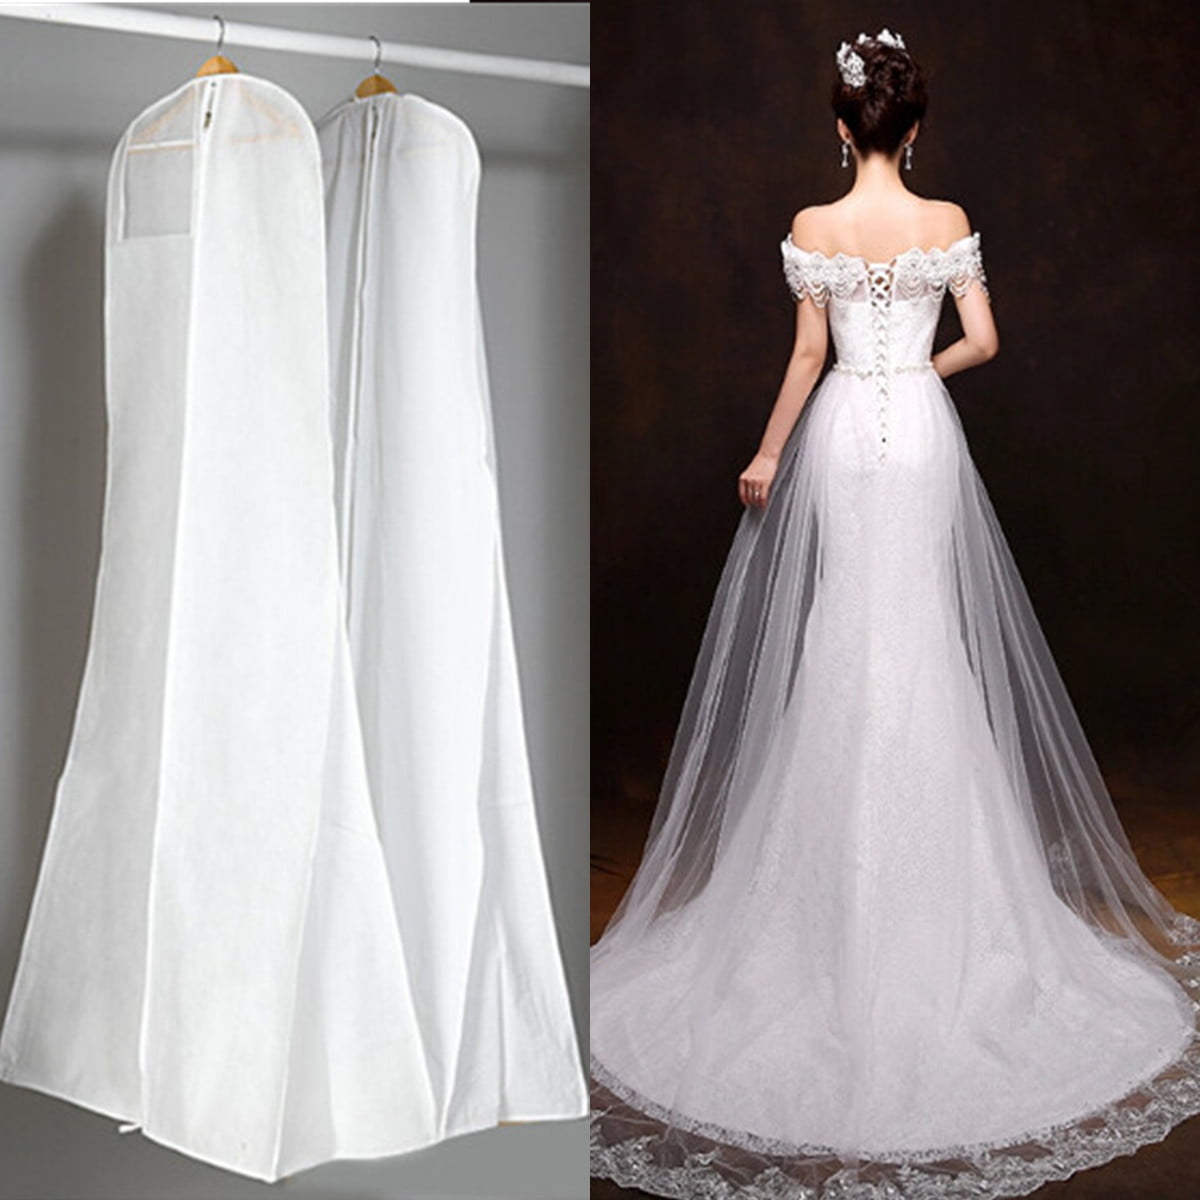 8'' Large Wedding Dress Bridal Gown Garment Zip Bag Clothes Cover Storage  Protector Pocket Anti dust Dustproof Breathable 8'' x 8''